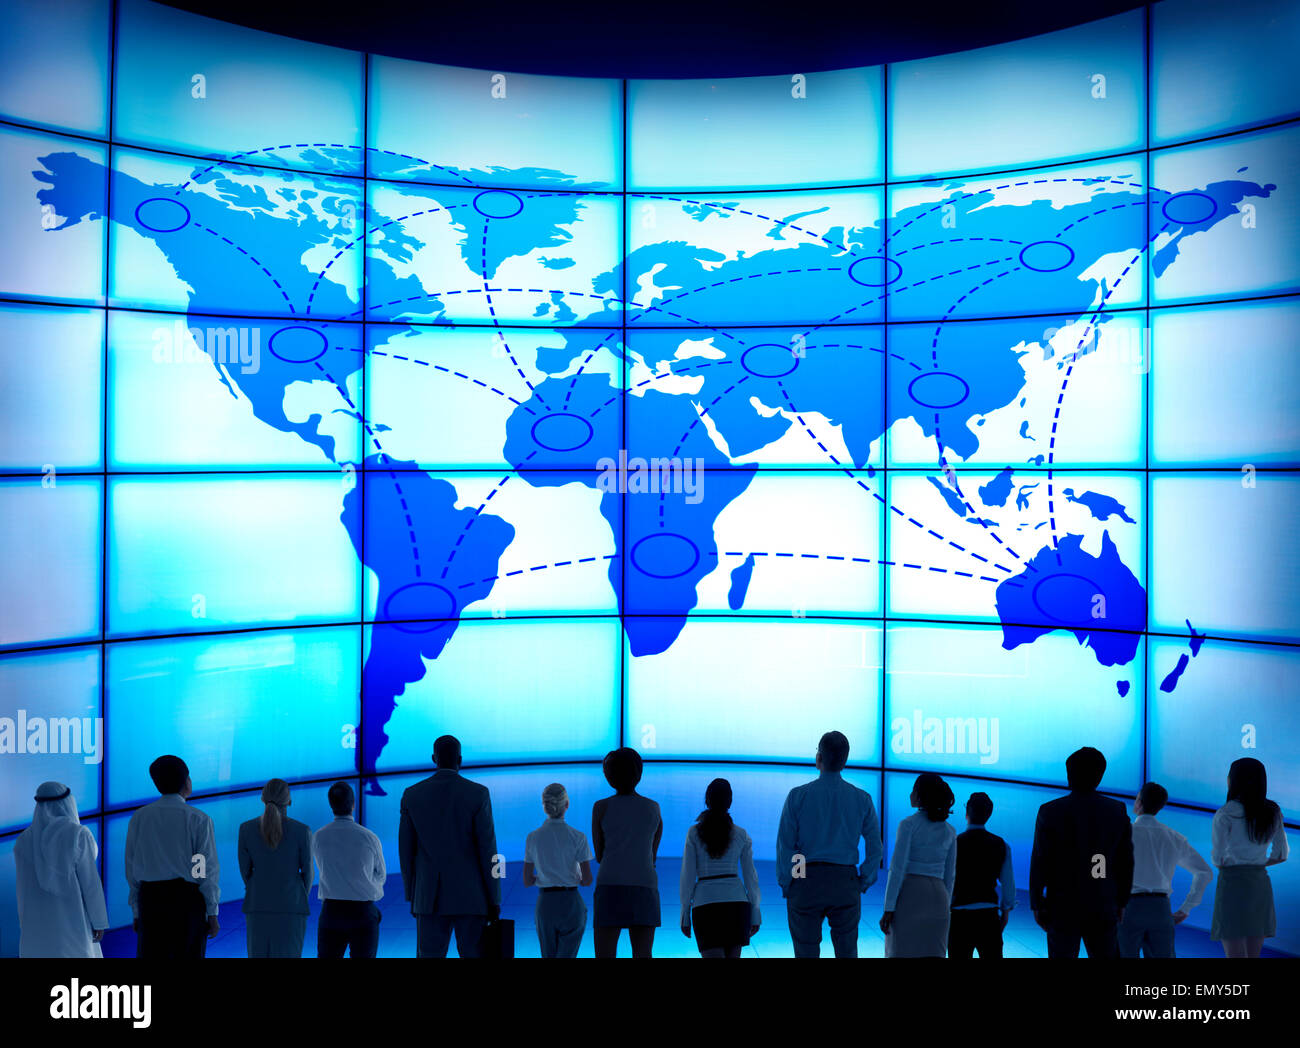 Global Business People Corporate World Map Connection Concept Stock Photo